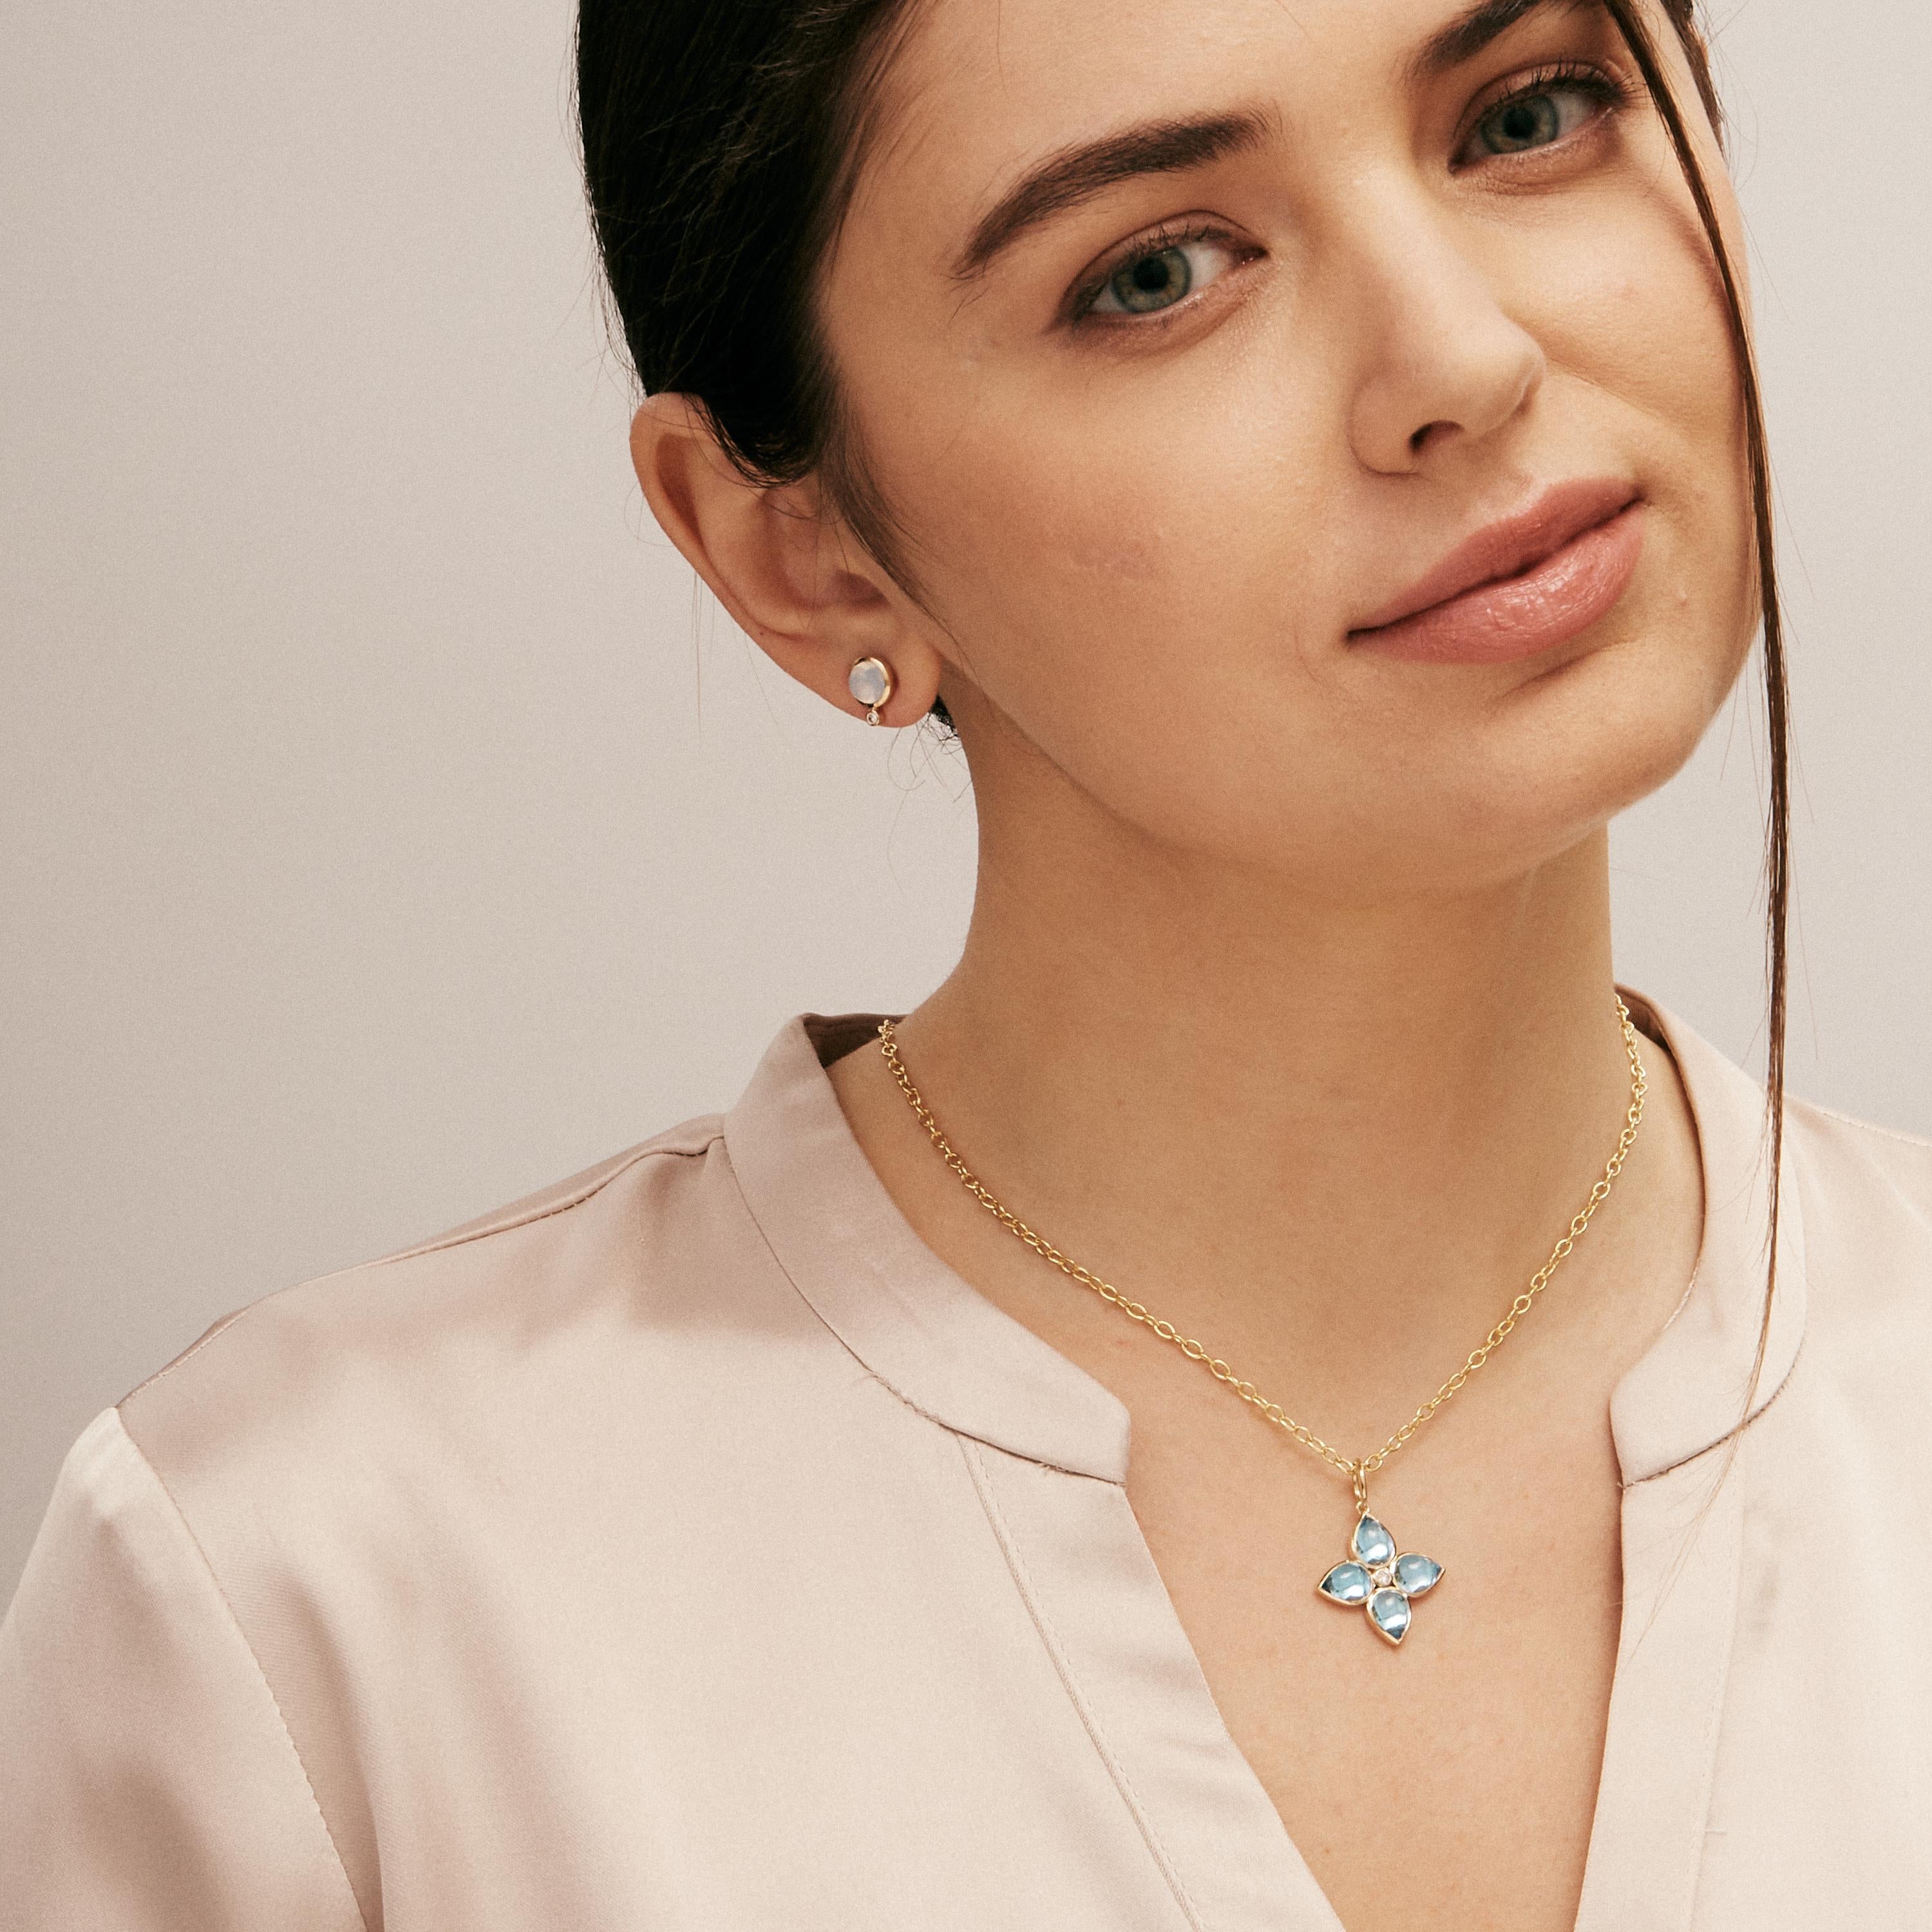 Created in 18 karat yellow gold
Blue topaz 6.50 carats approx.
Diamonds 0.04 carat approx.
Chain sold separately

Fashioned from 18 karat yellow gold, this pendant features a stunning 6.50 carat blue topaz surrounded by a sprinkle of 0.04 carats of